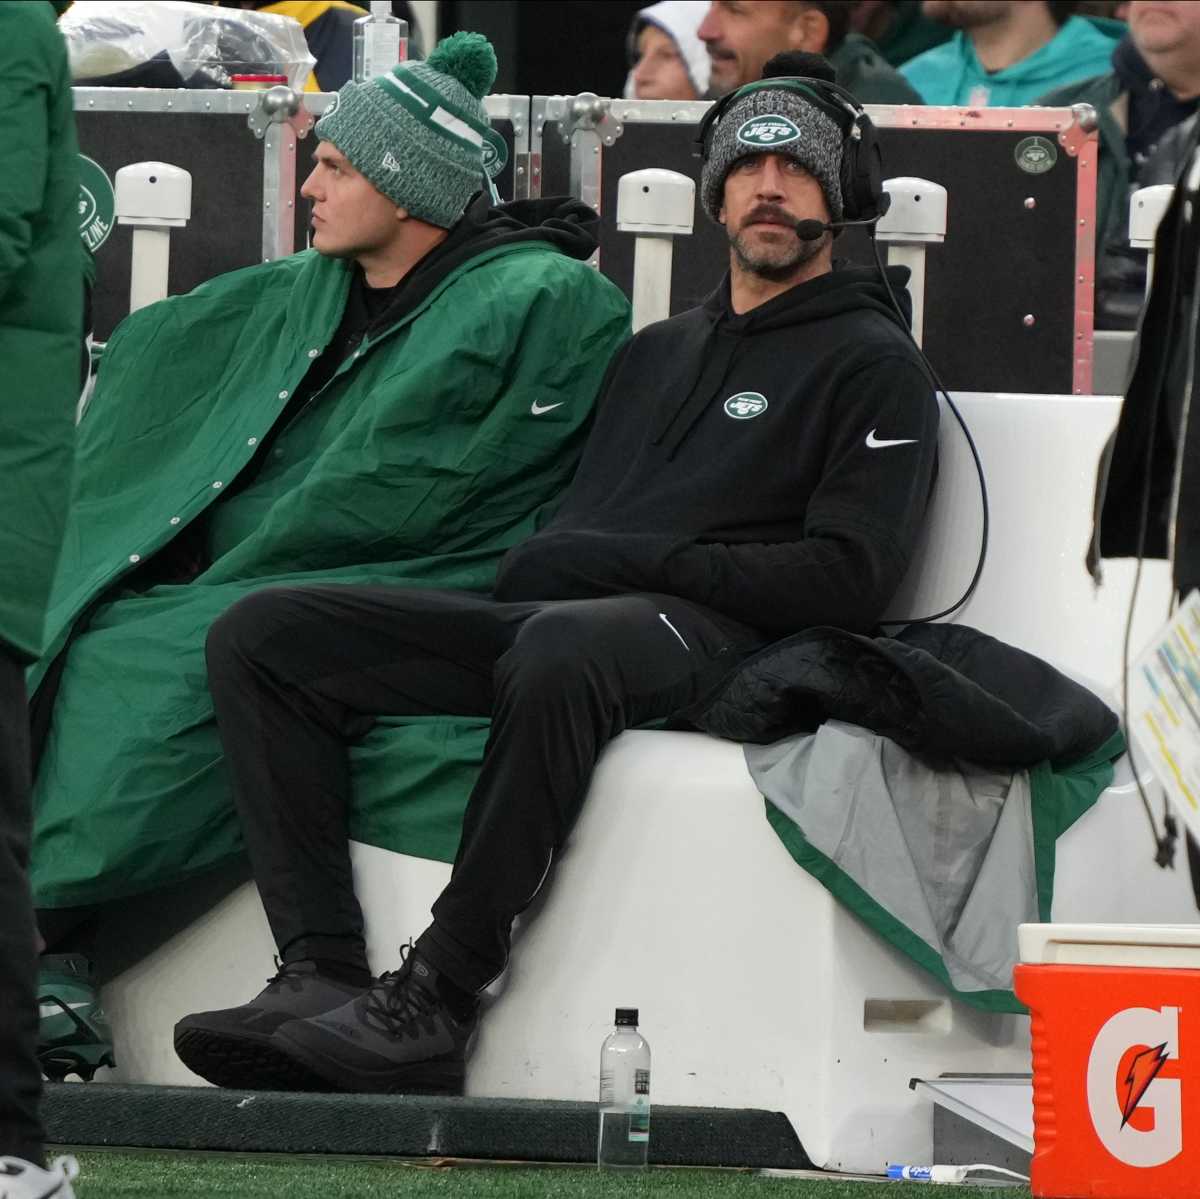 Aaron Rodgers sits on the bench wearing a headset next to Zach Wilson, who is wrapped in a green coat